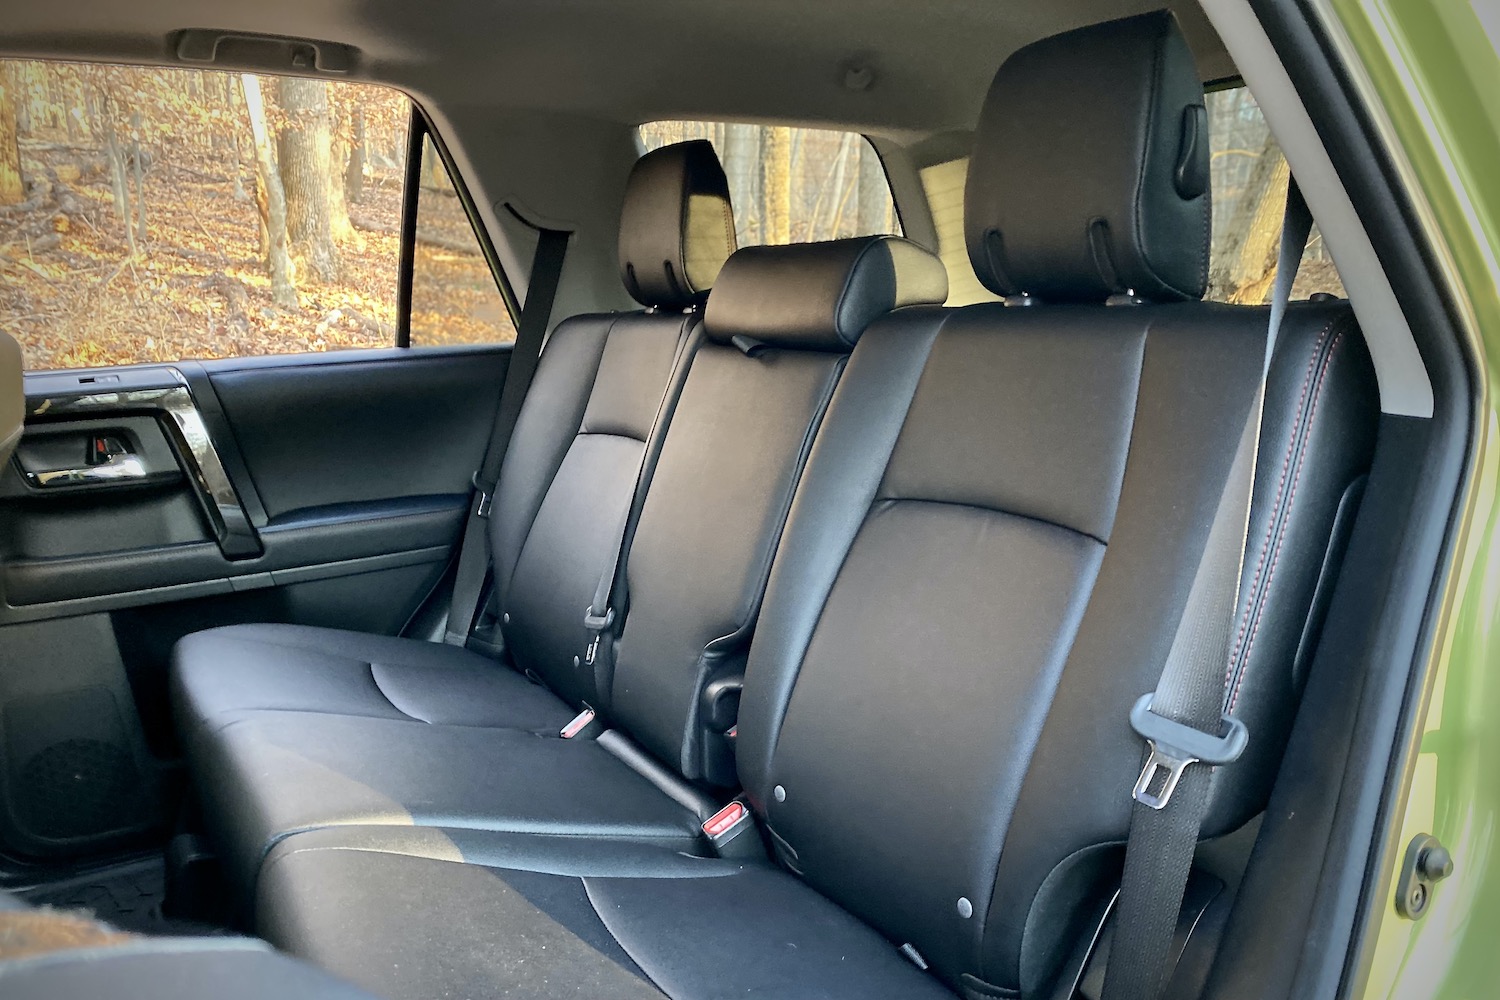 Rear seats of Toyota 4Runner TRD Pro from driver's side.